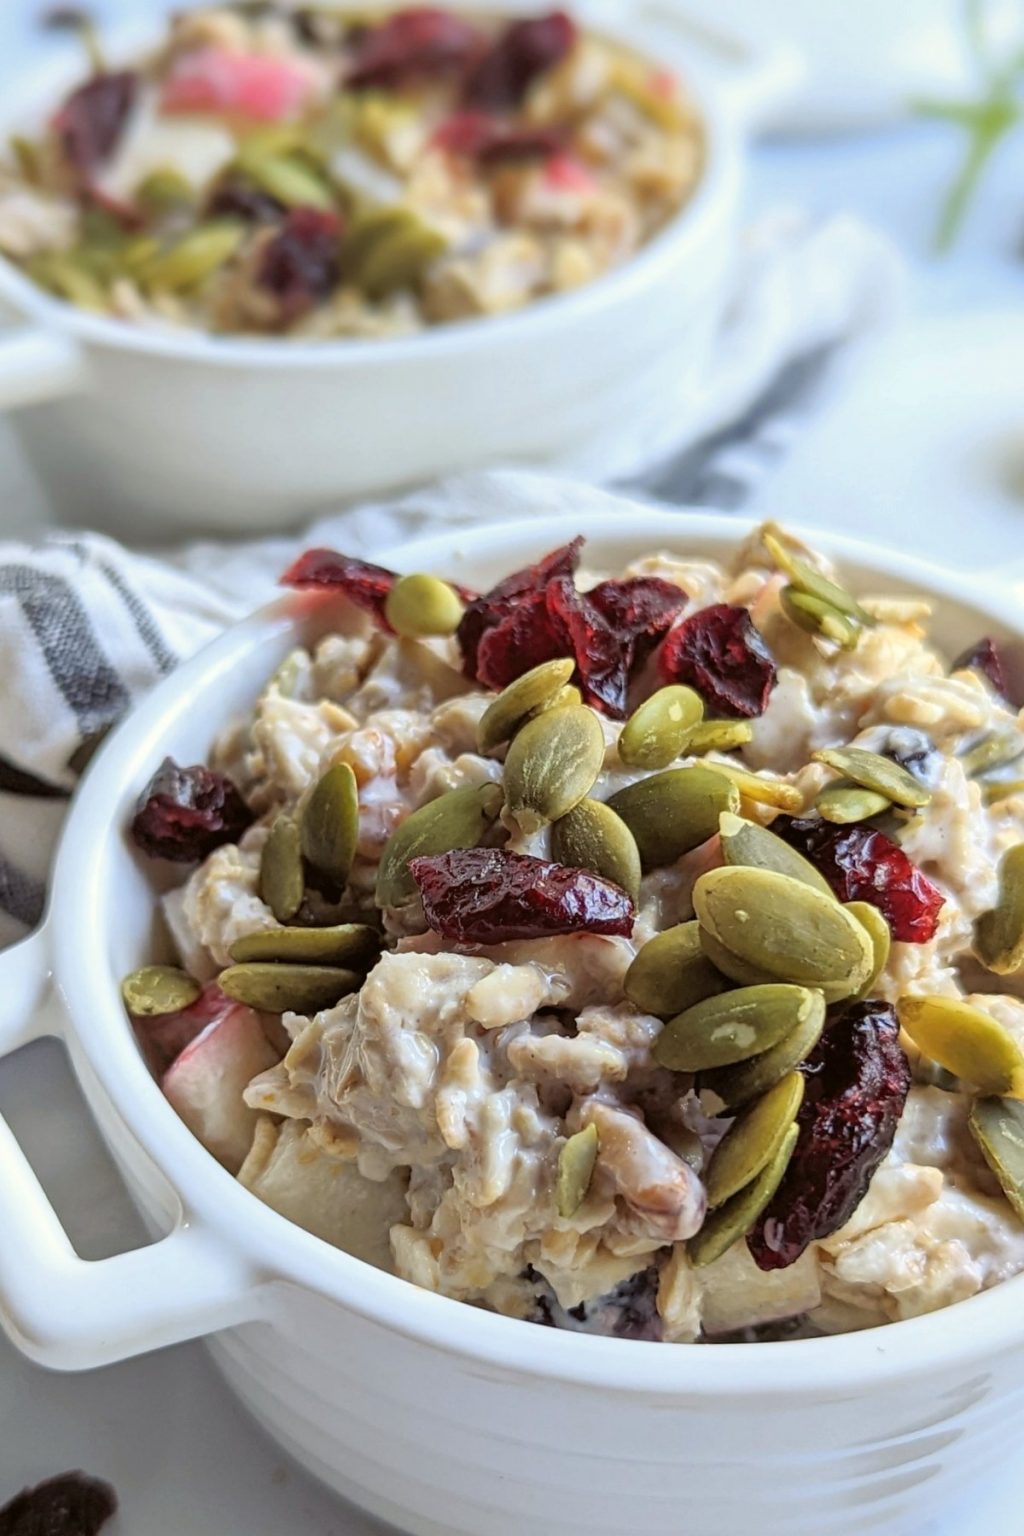 low sodium breakfasts with oats no salt added healthier instant oatmeal made overnight in ramekins or jars with pumpkin seeds and cranberries and walnuts